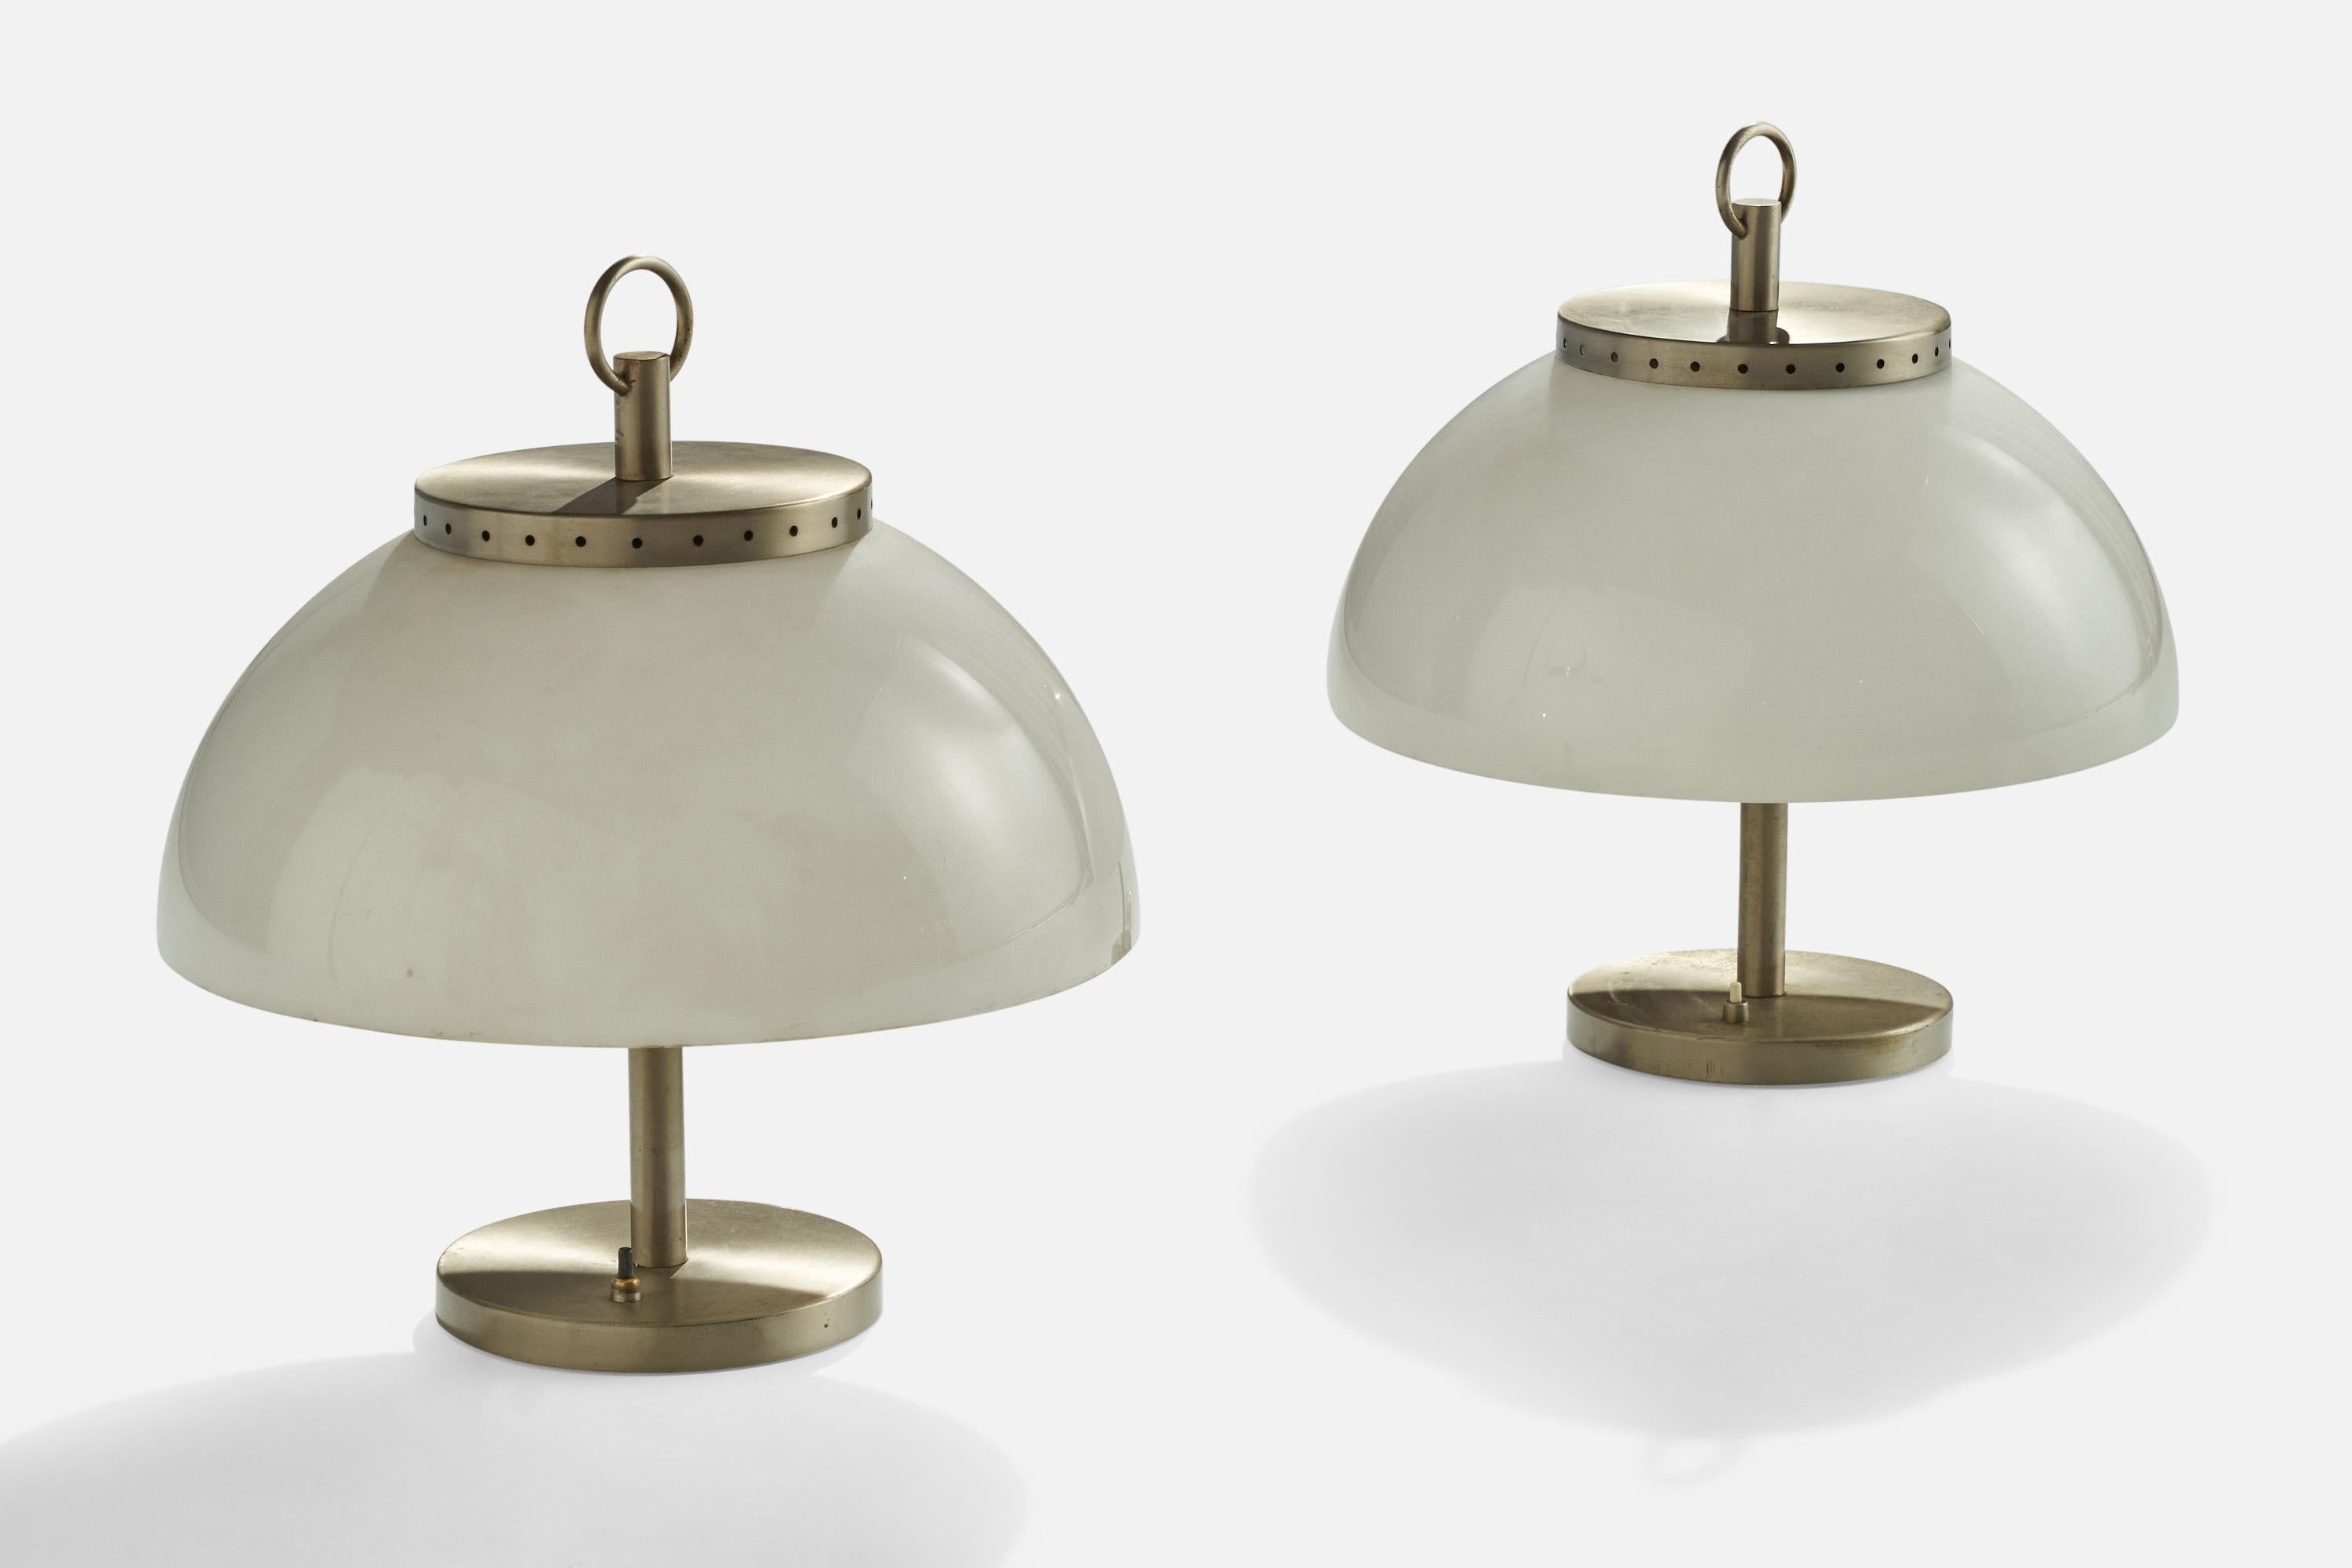 A pair of metal and acrylic table lamps designed and produced in Italy, c. 1960s.

Overall Dimensions (inches): 17” H x 15.75 W x 15.75D
Stated dimensions include shade.
Bulb Specifications: E-14 Bulb
Number of Sockets: 6
All lighting will be